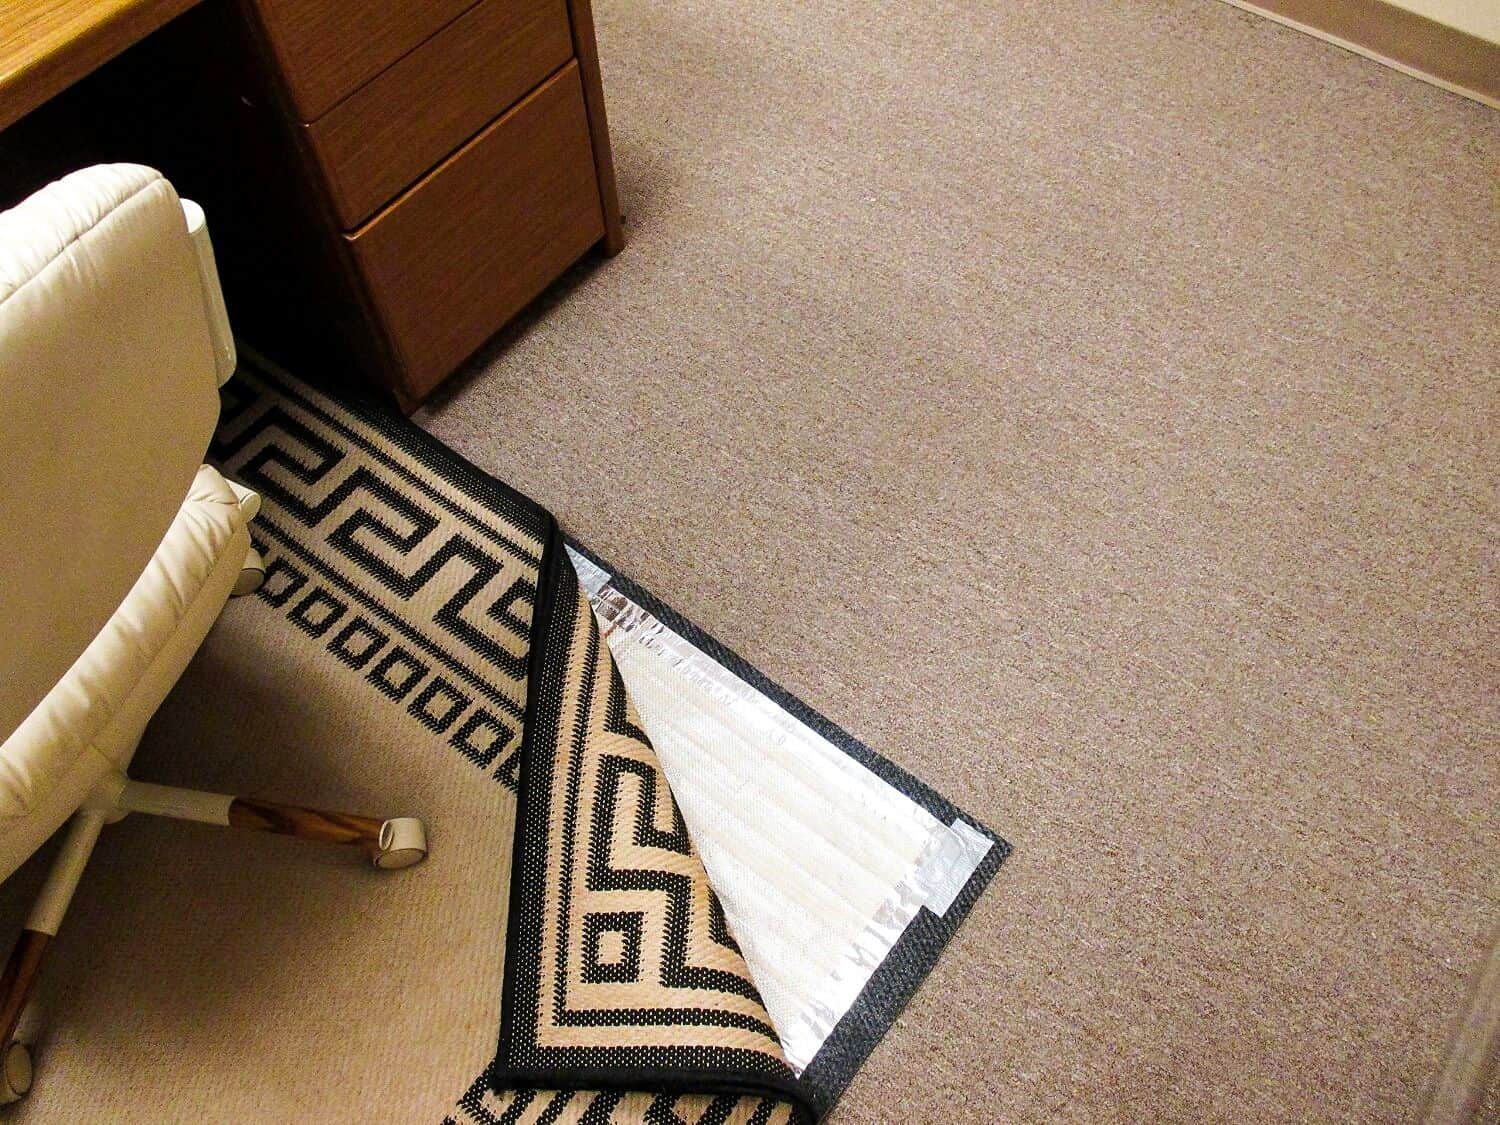 A desk with a RugBuddy Under Rug Heating Panel next to it.